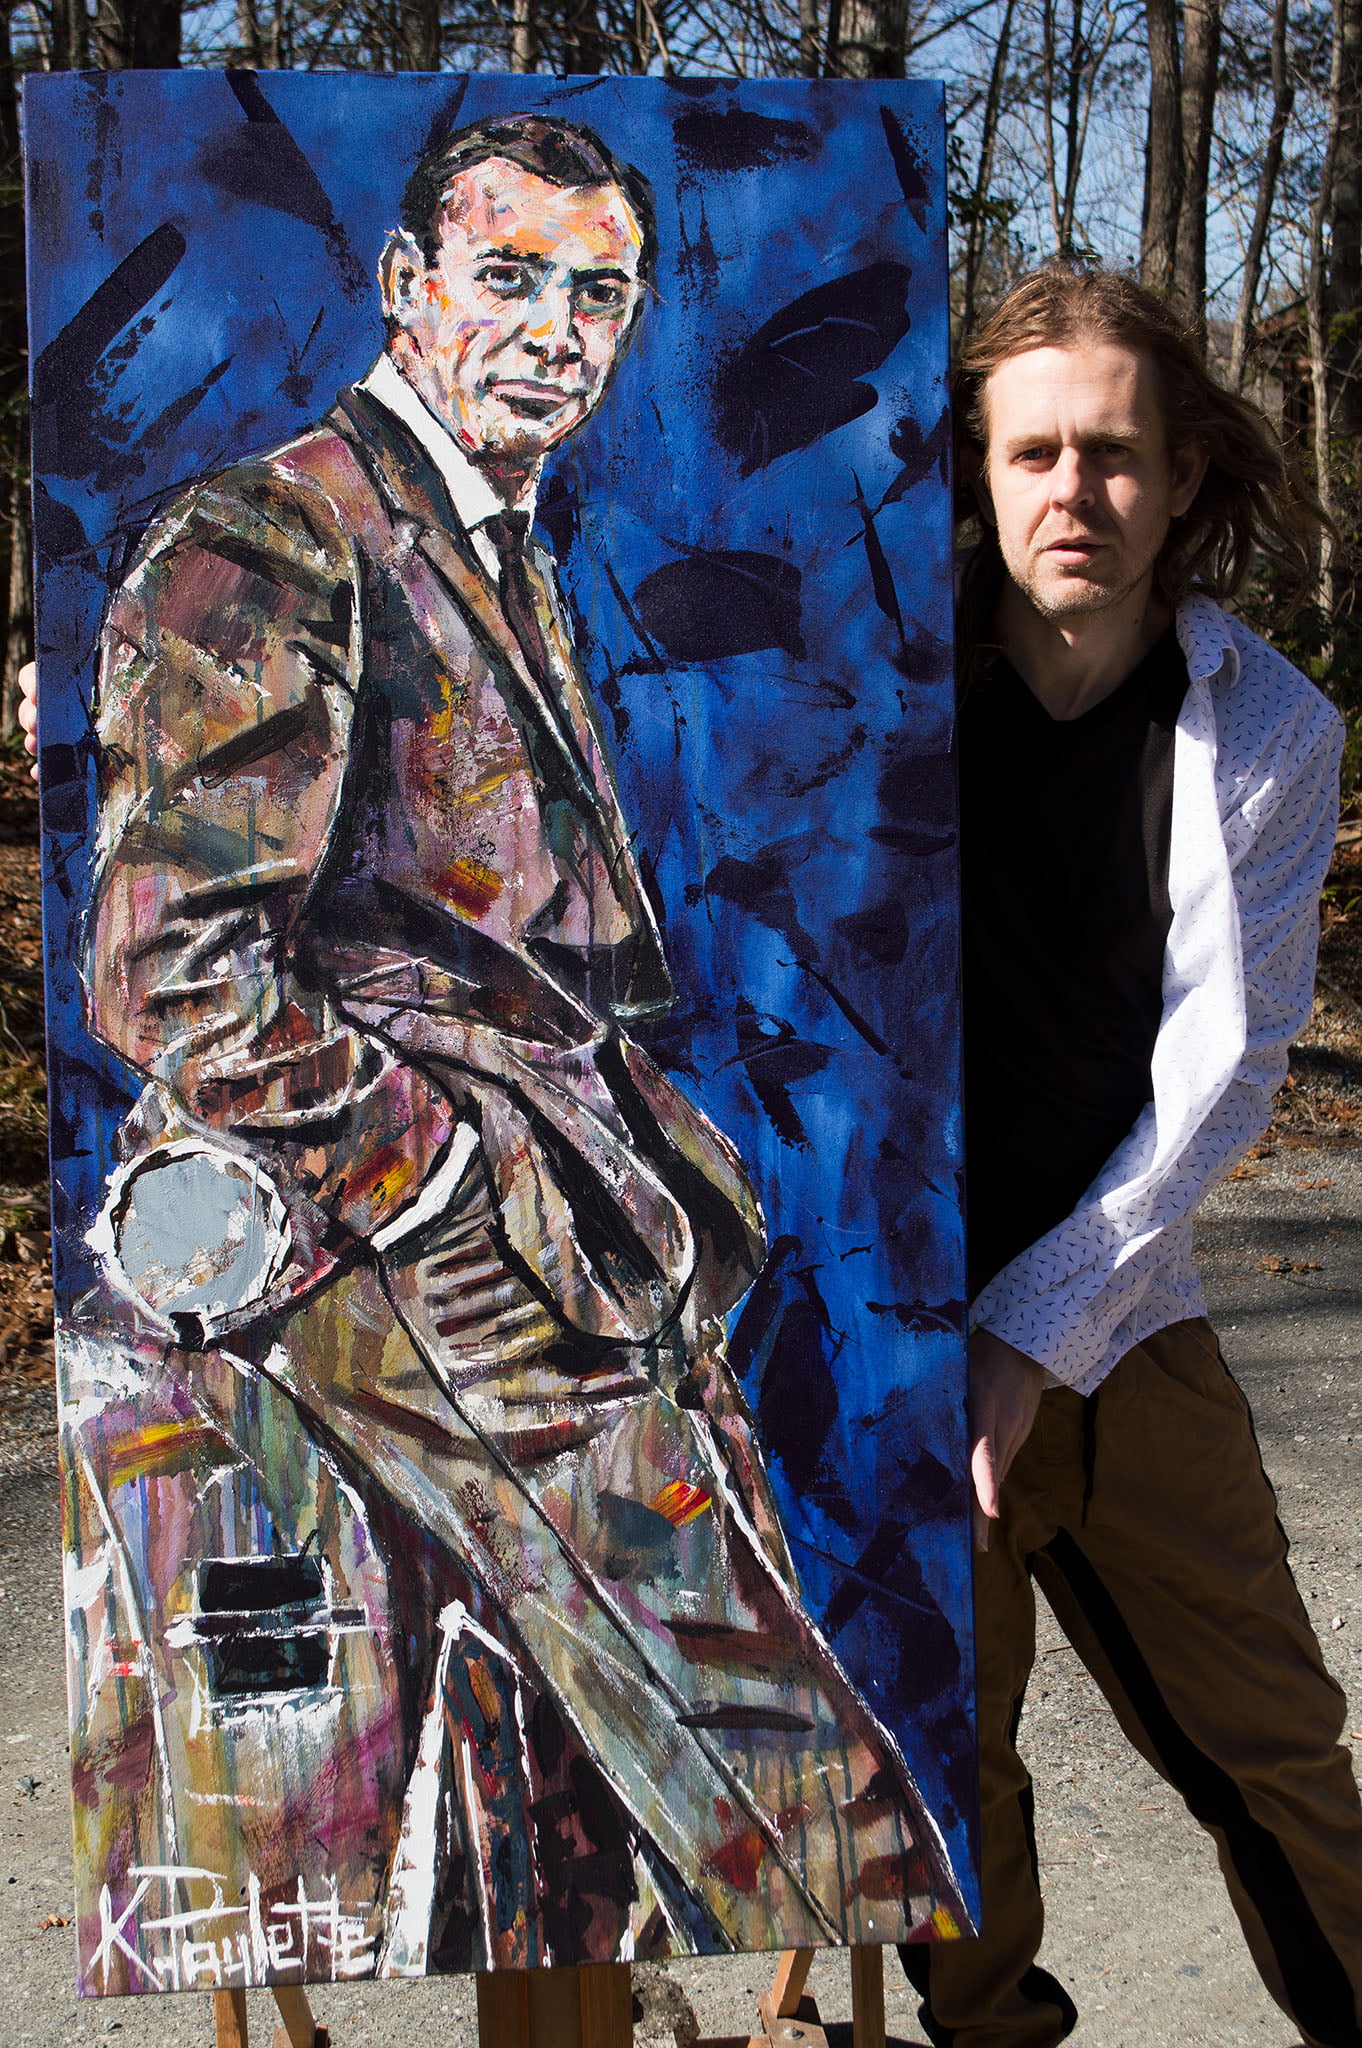 Prime 21 Banner Elk artwork of James Bond portrait of Sean Connery with artist Kent Paulette standing next to the painting.